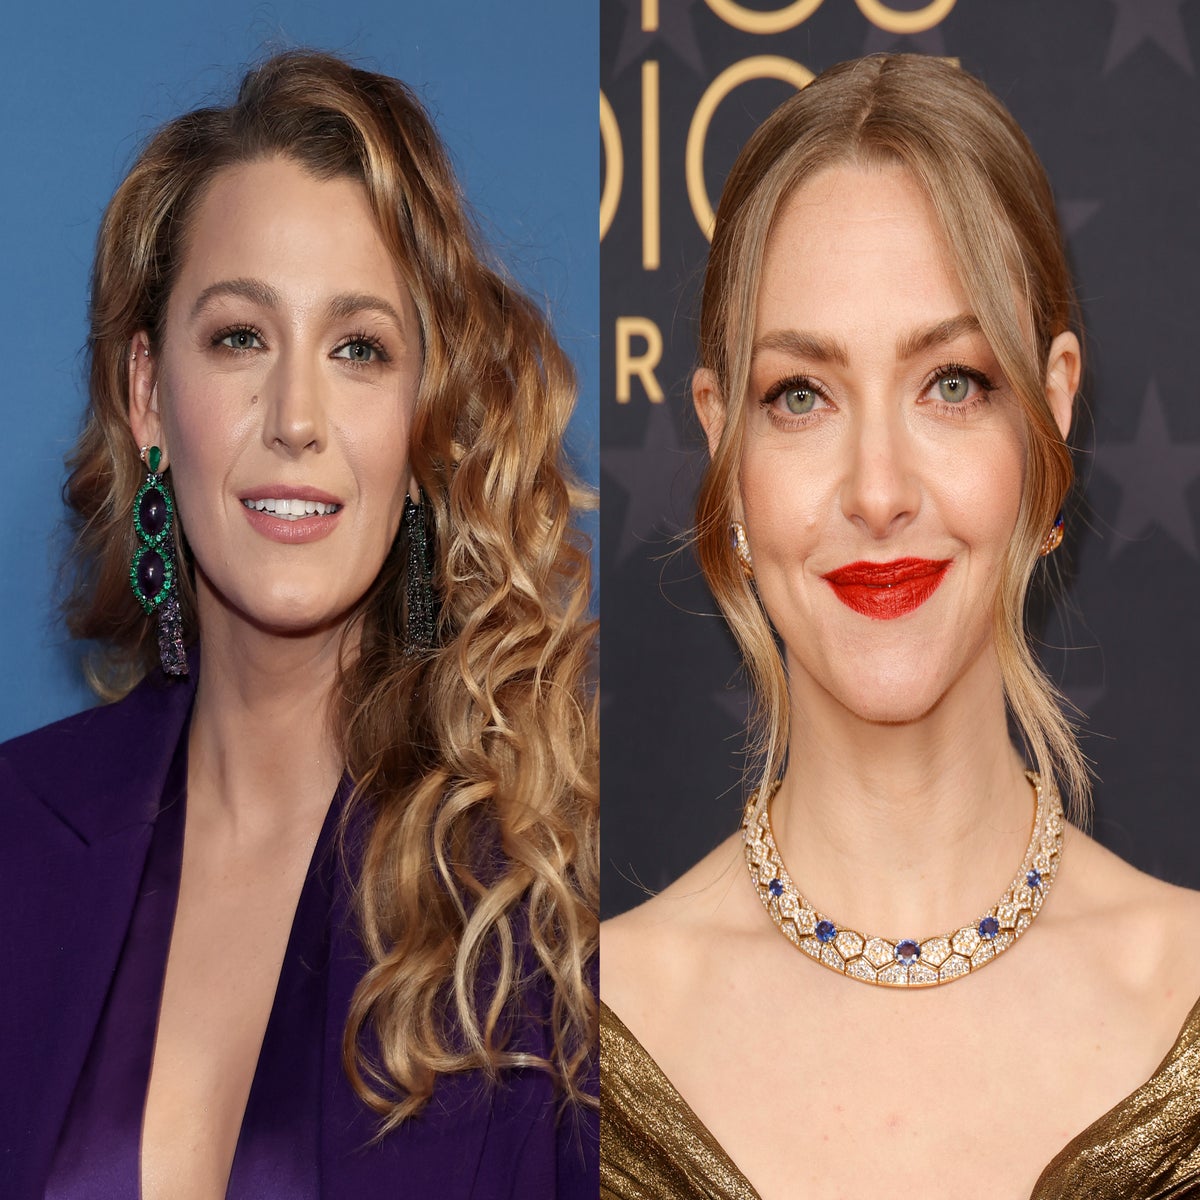 Blake Lively almost starred in Mean Girls instead of Amanda Seyfried